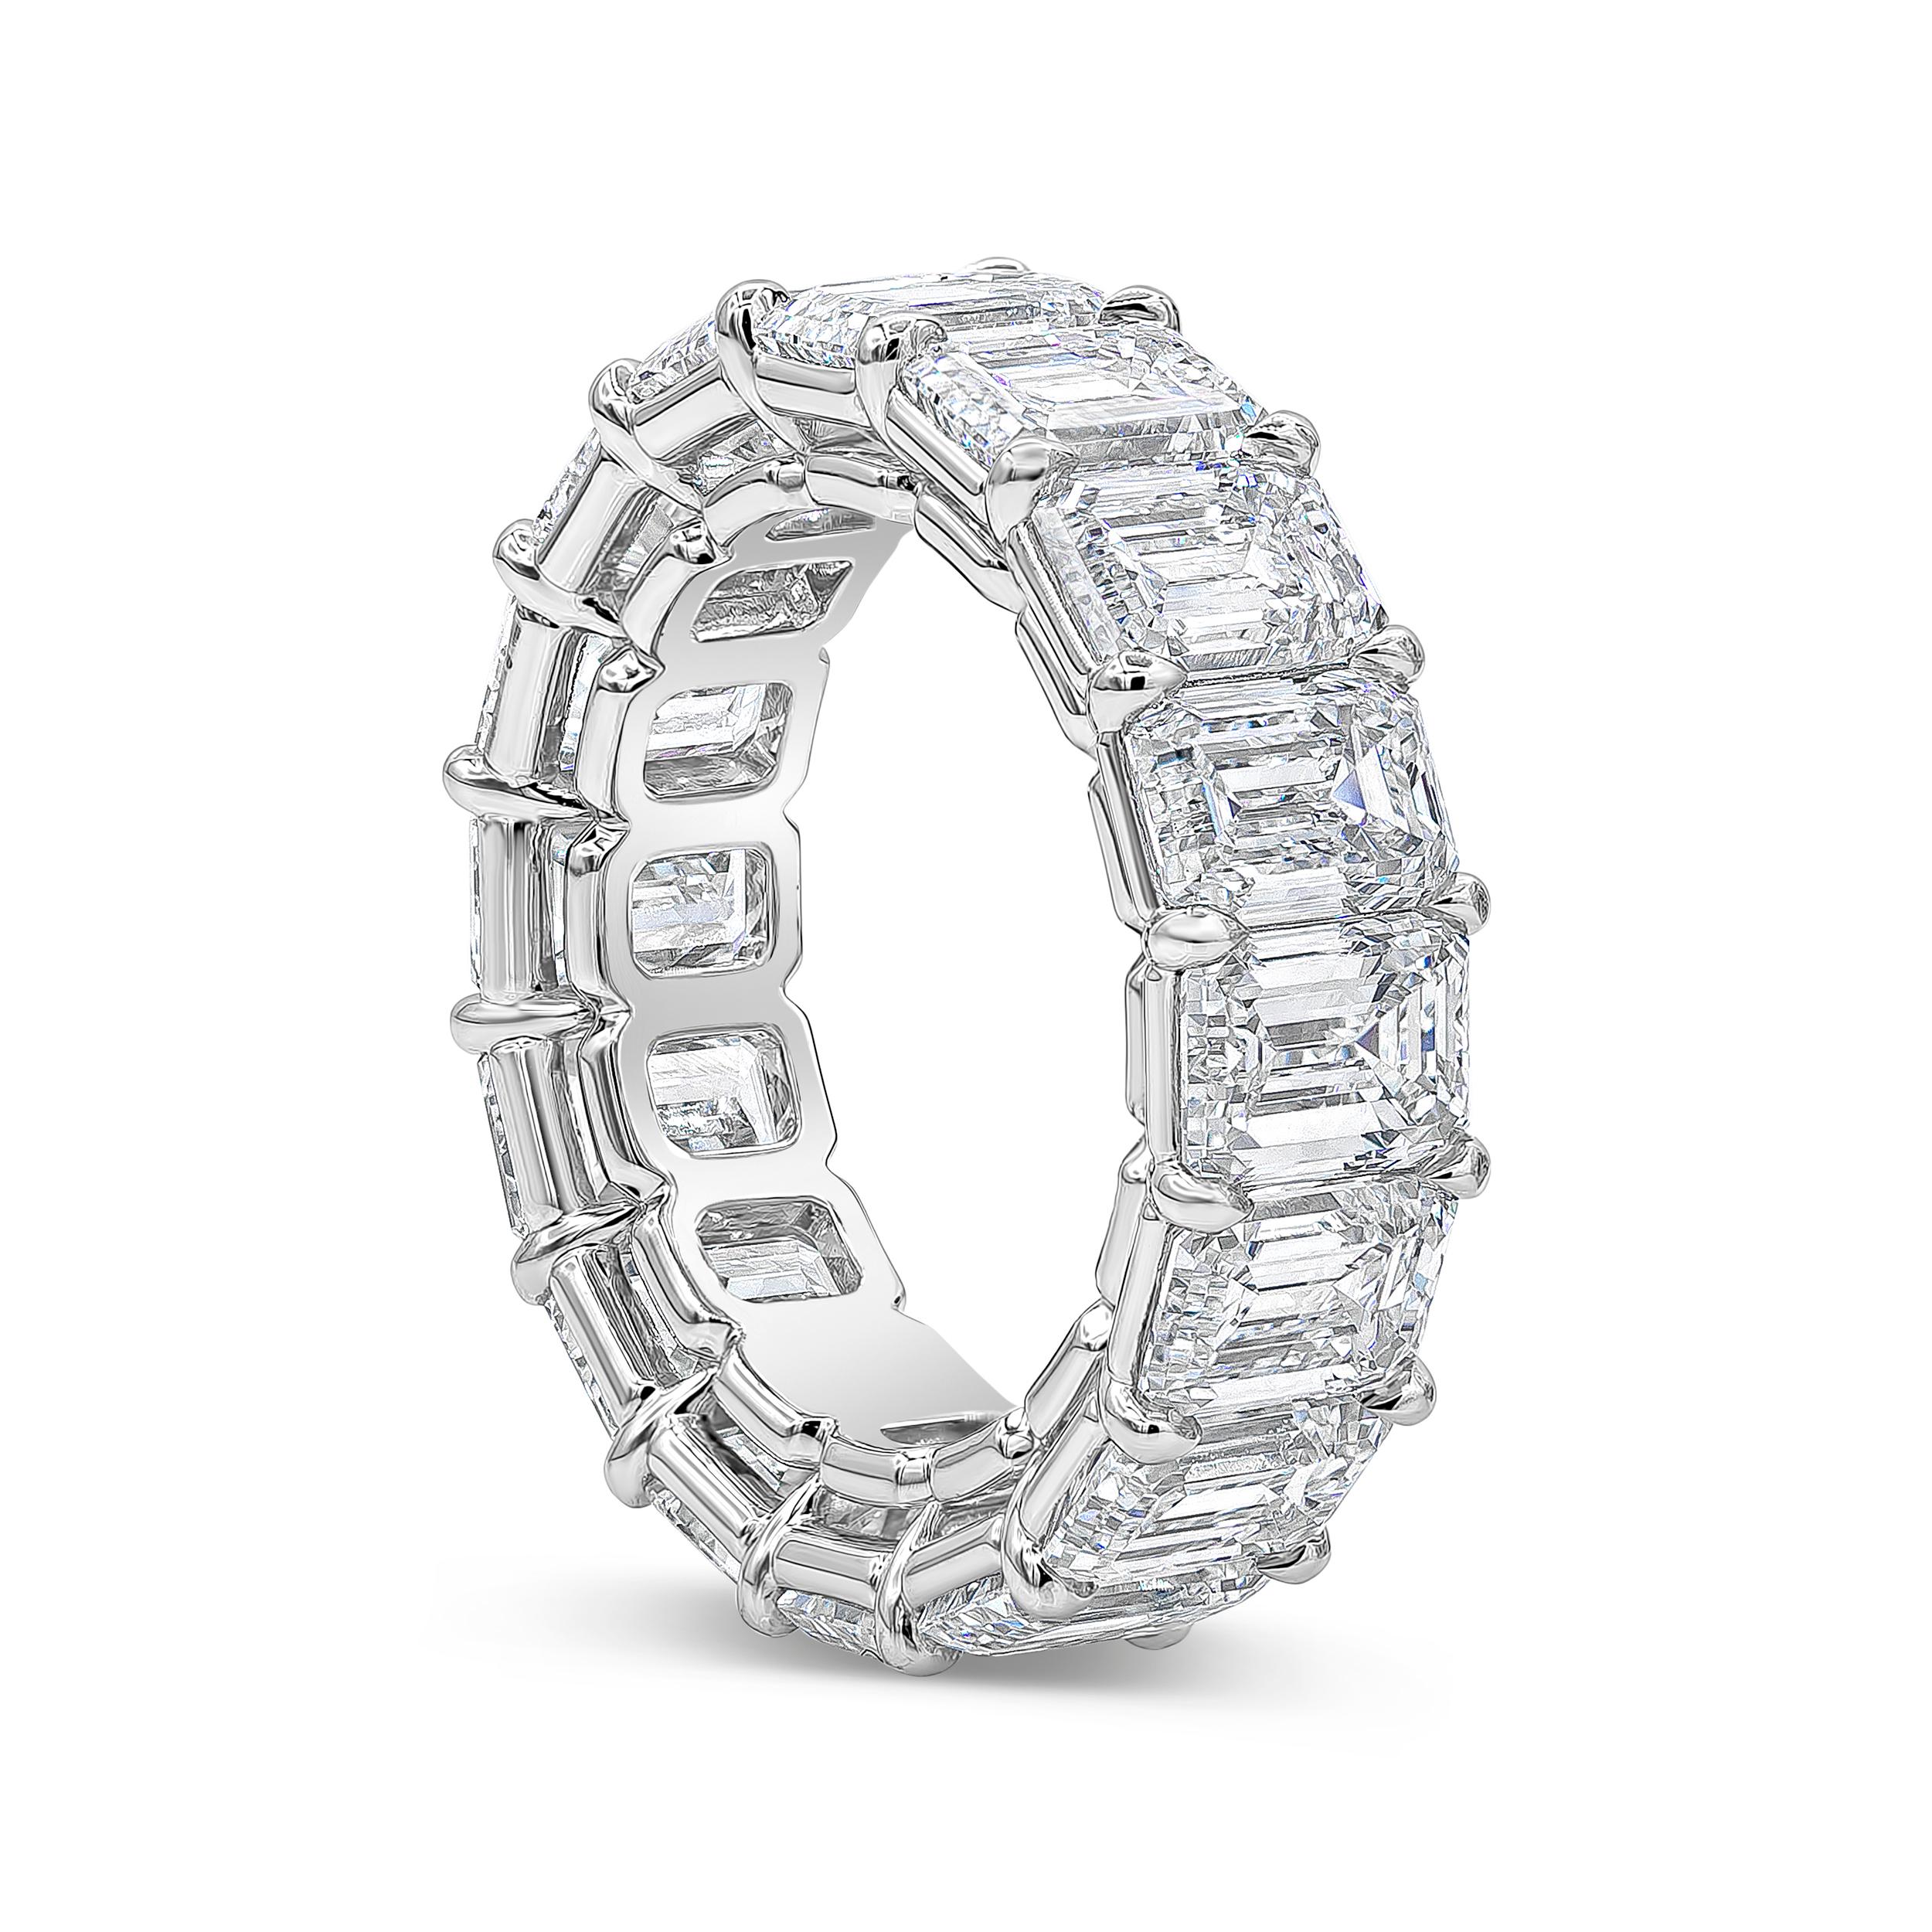 A collection quality eternity wedding band showcasing emerald cut diamonds weighing 12.48 carats total, set in an open-gallery setting made in platinum. Each diamond is accompanied by a GIA certificate stating that the diamond is G-H color, IF-VS1